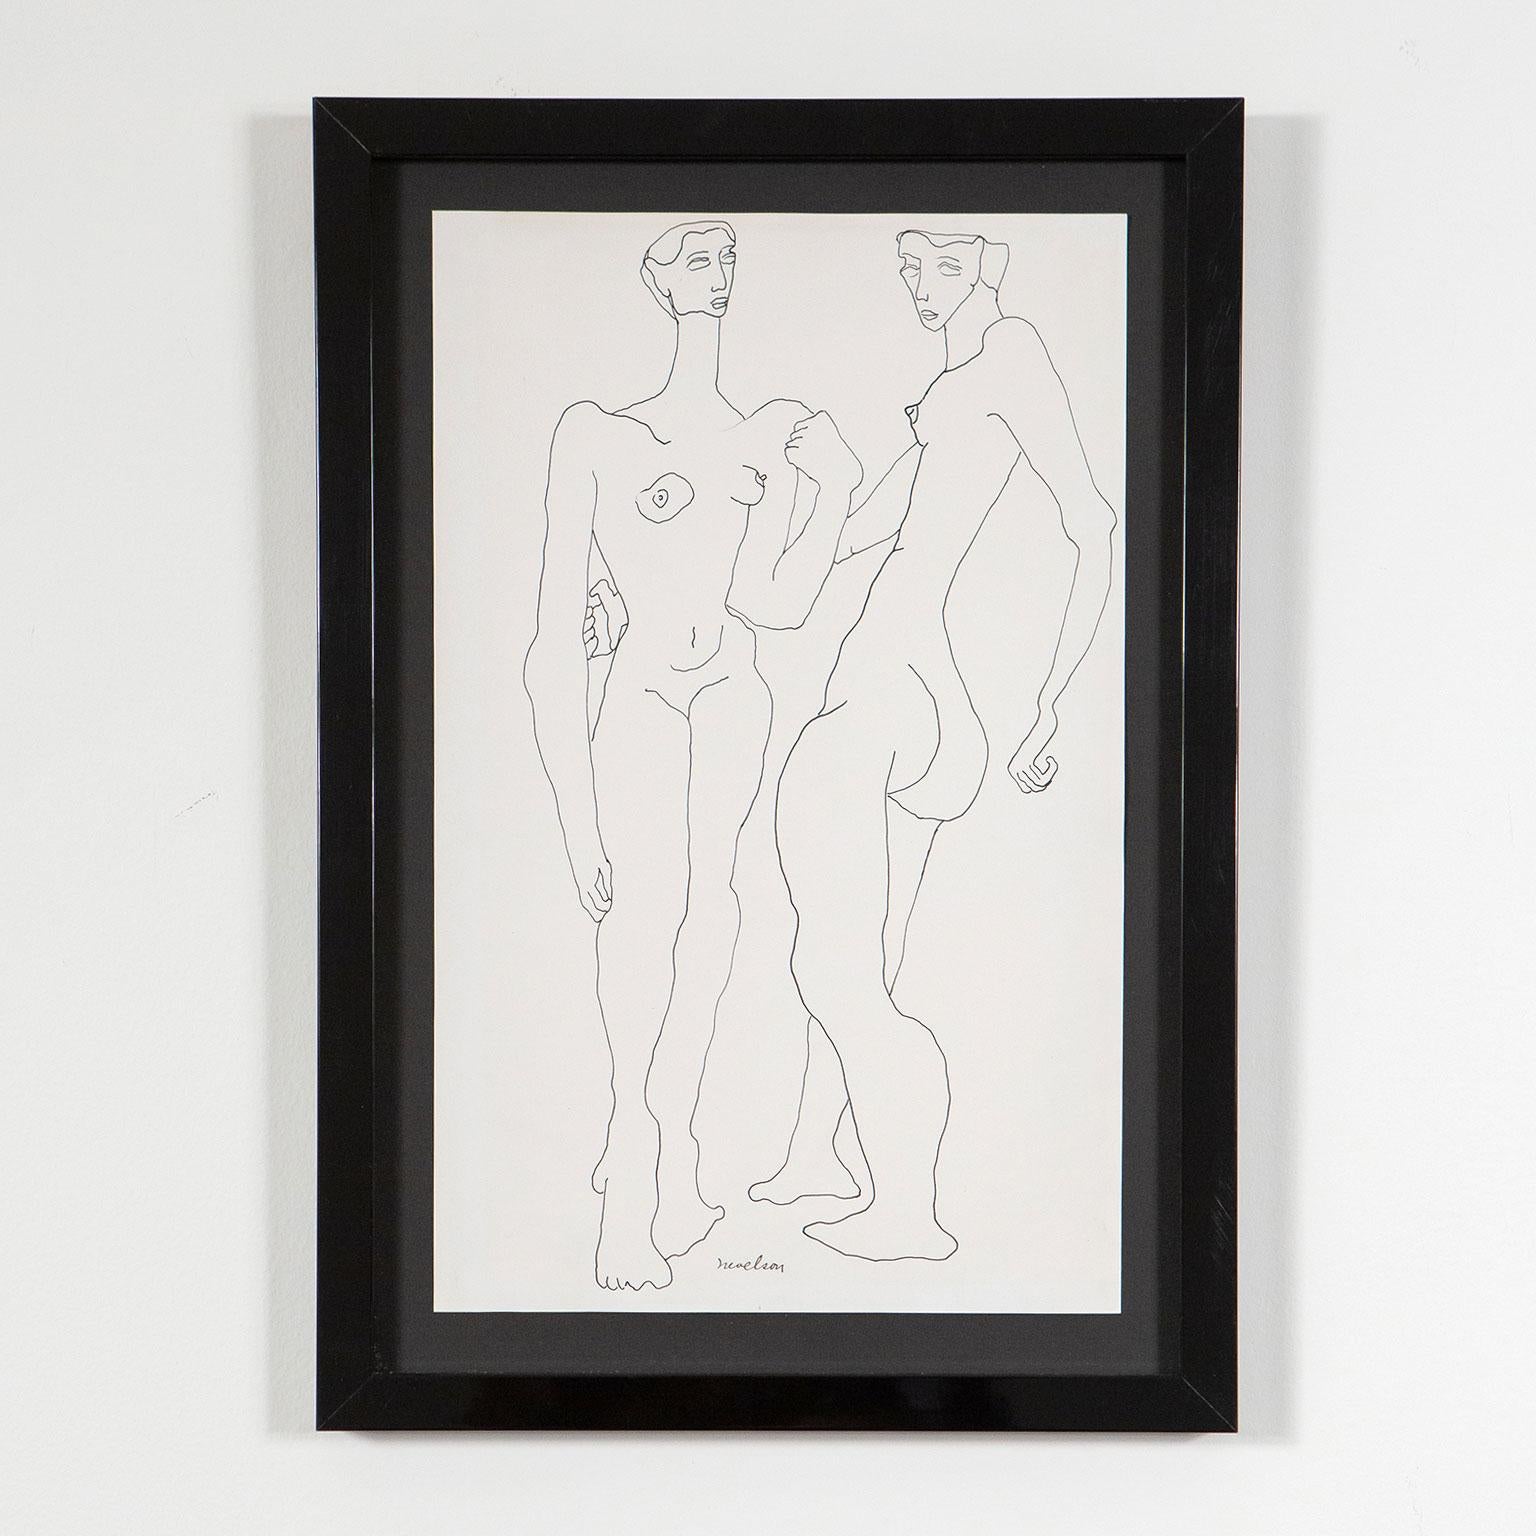 Two Nudes, USA, circa 1930s  Signed in ink by the artist  Pen and ink on paper - Art by Louise Nevelson